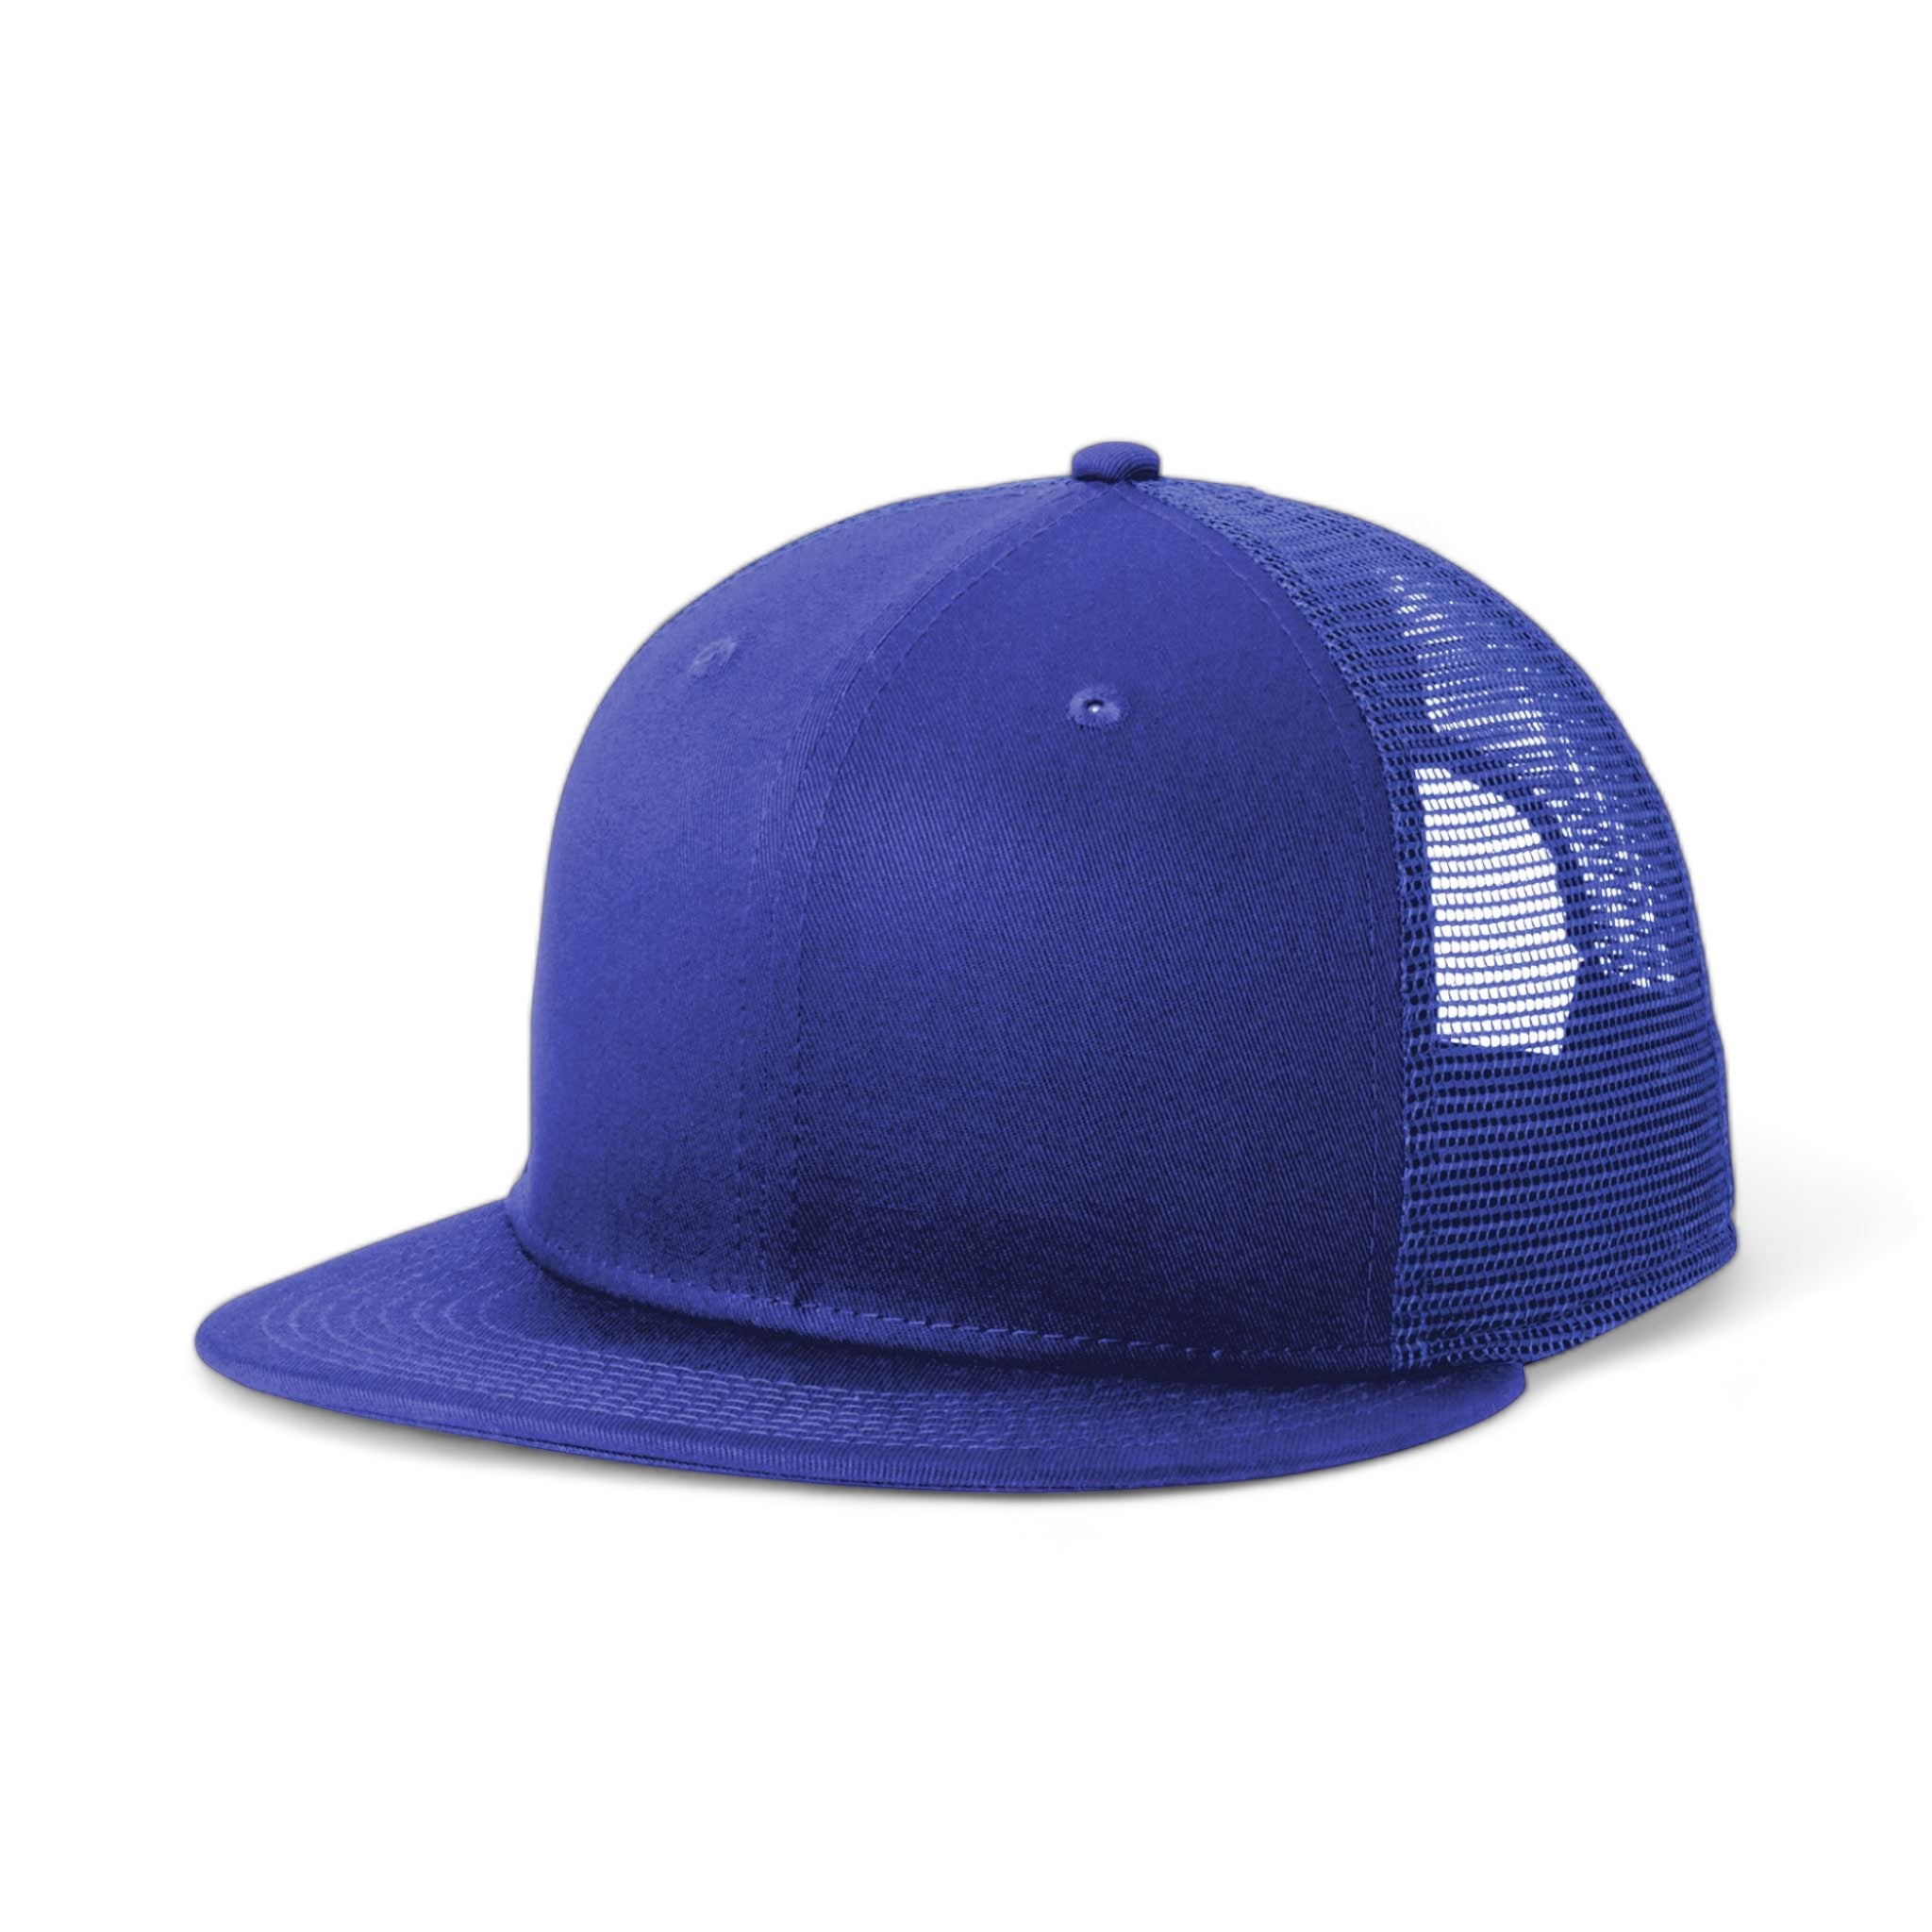 Side view of New Era NE4030 custom hat in royal and royal